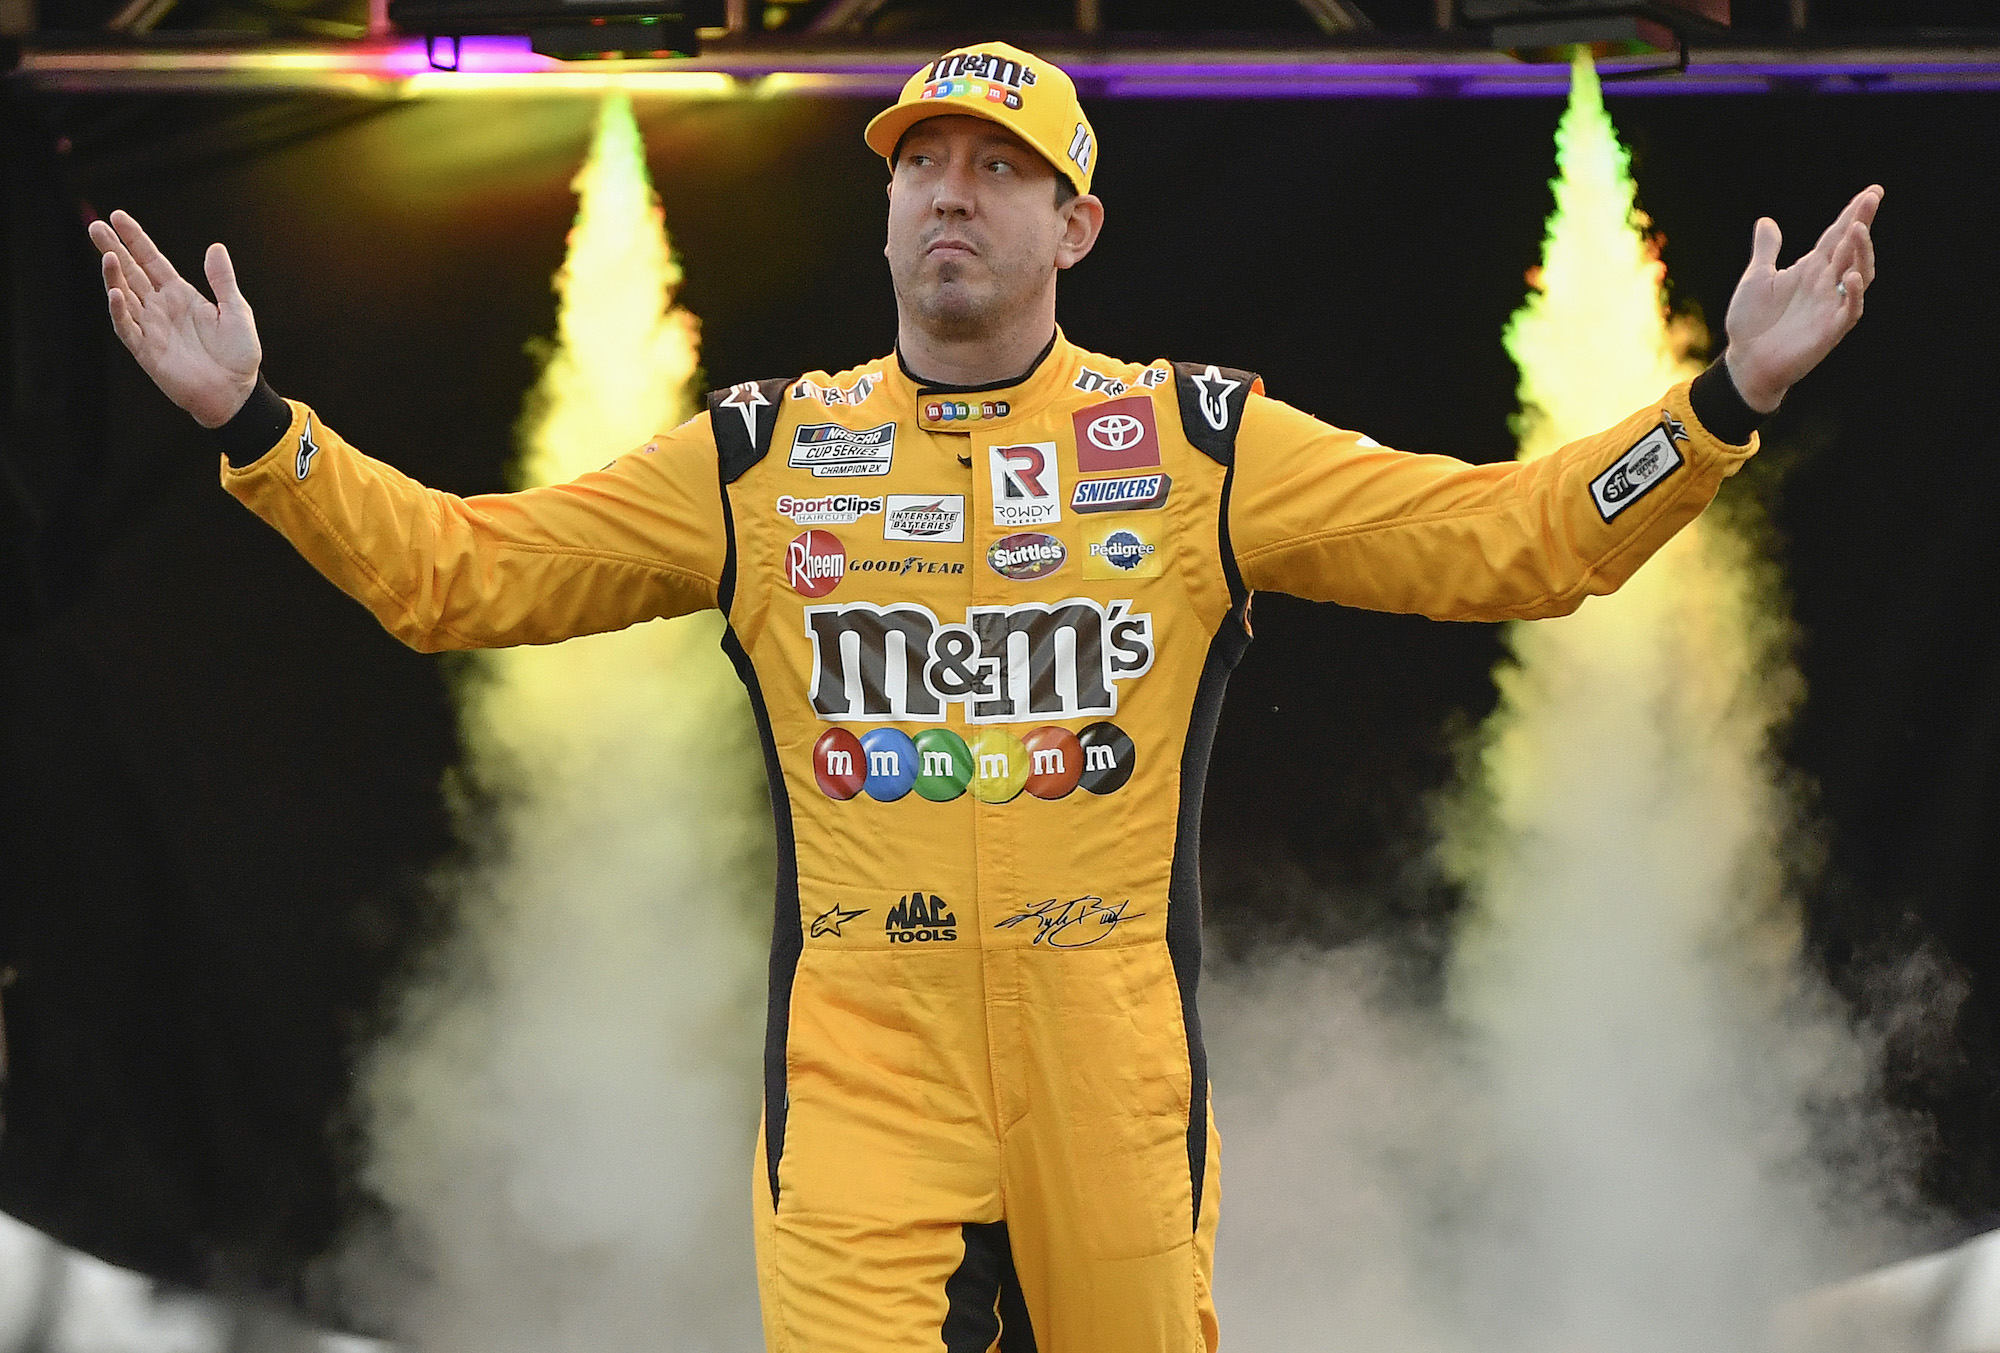 Kyle Busch Already Finding More Freedom With Richard Childress Racing and Doing Things Joe Gibbs Racing Wouldn’t Allow, According to New Report